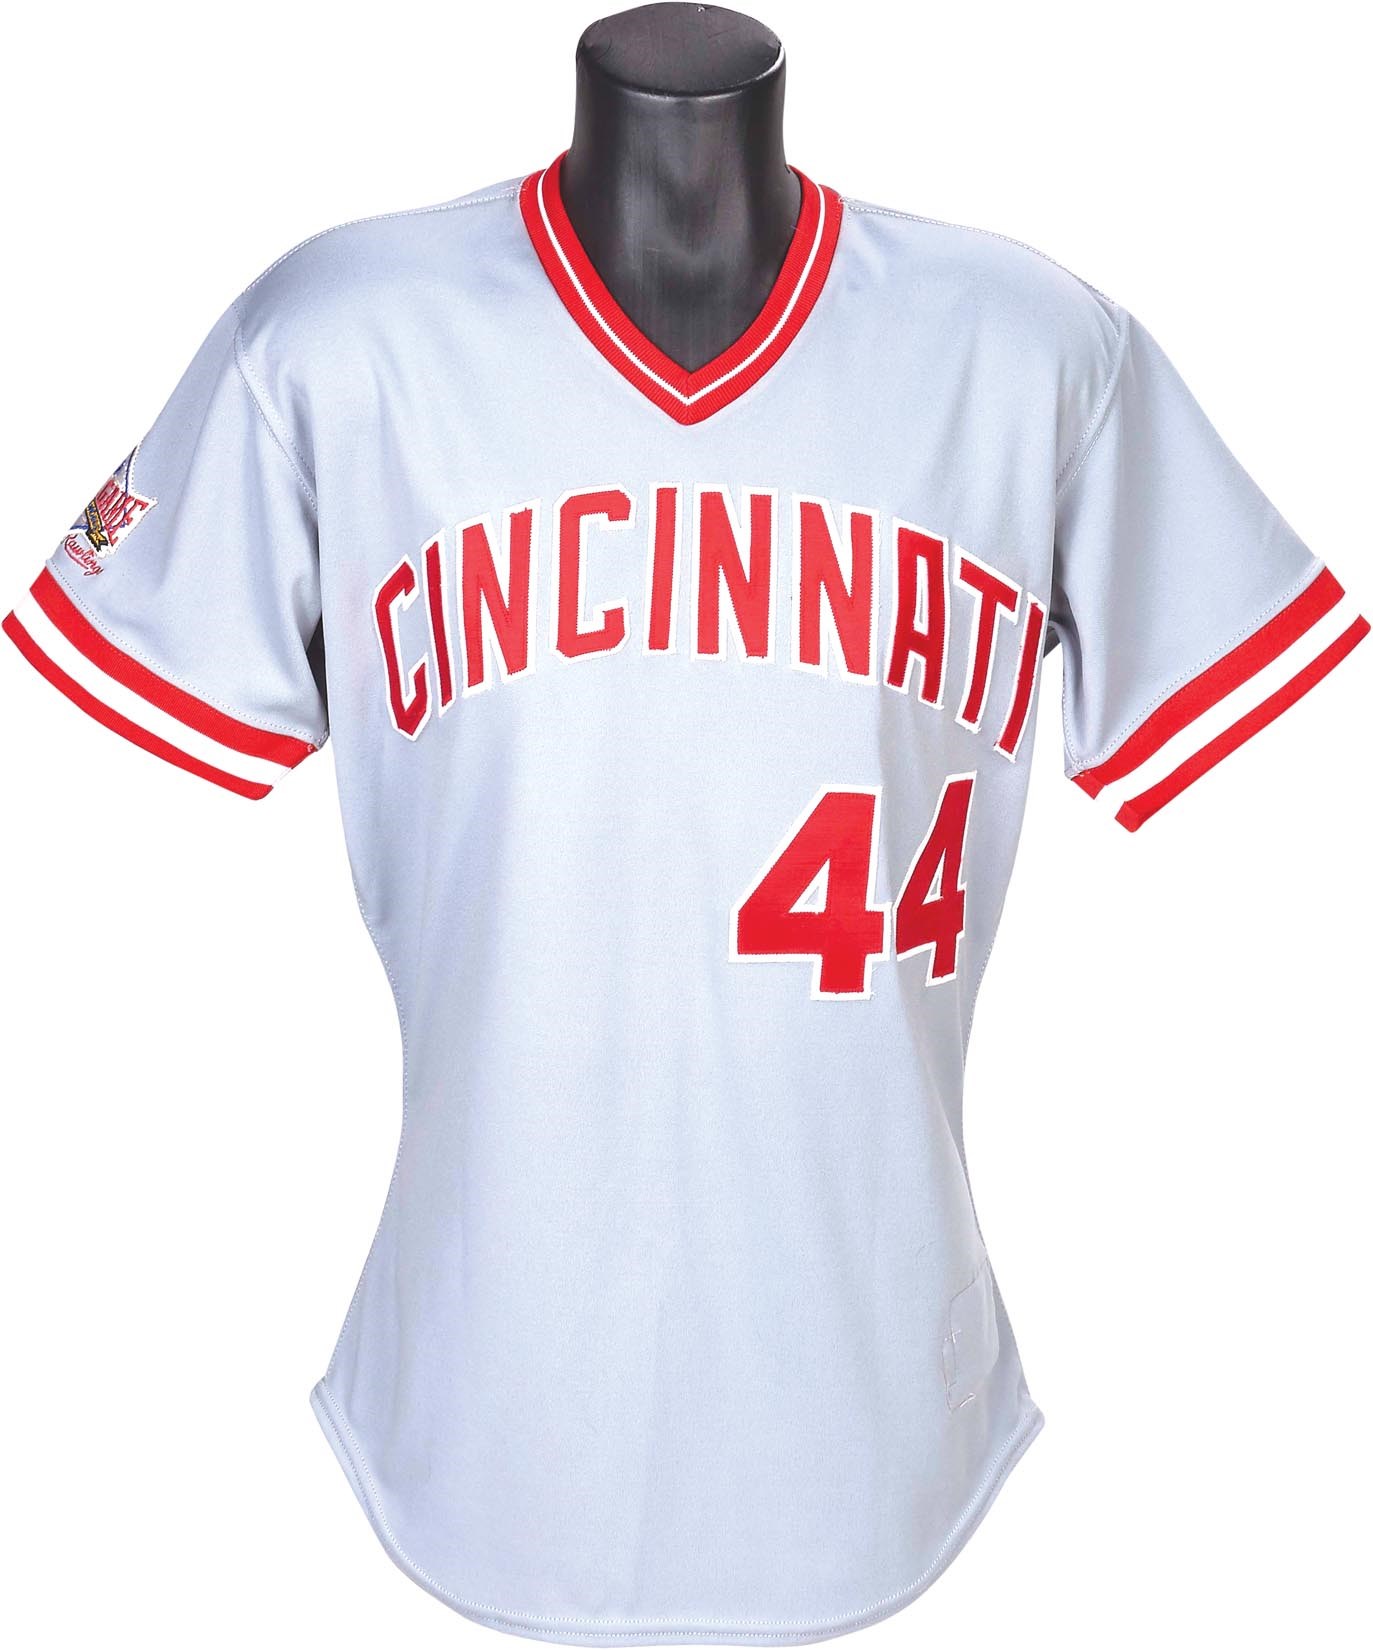 reds all star game jersey